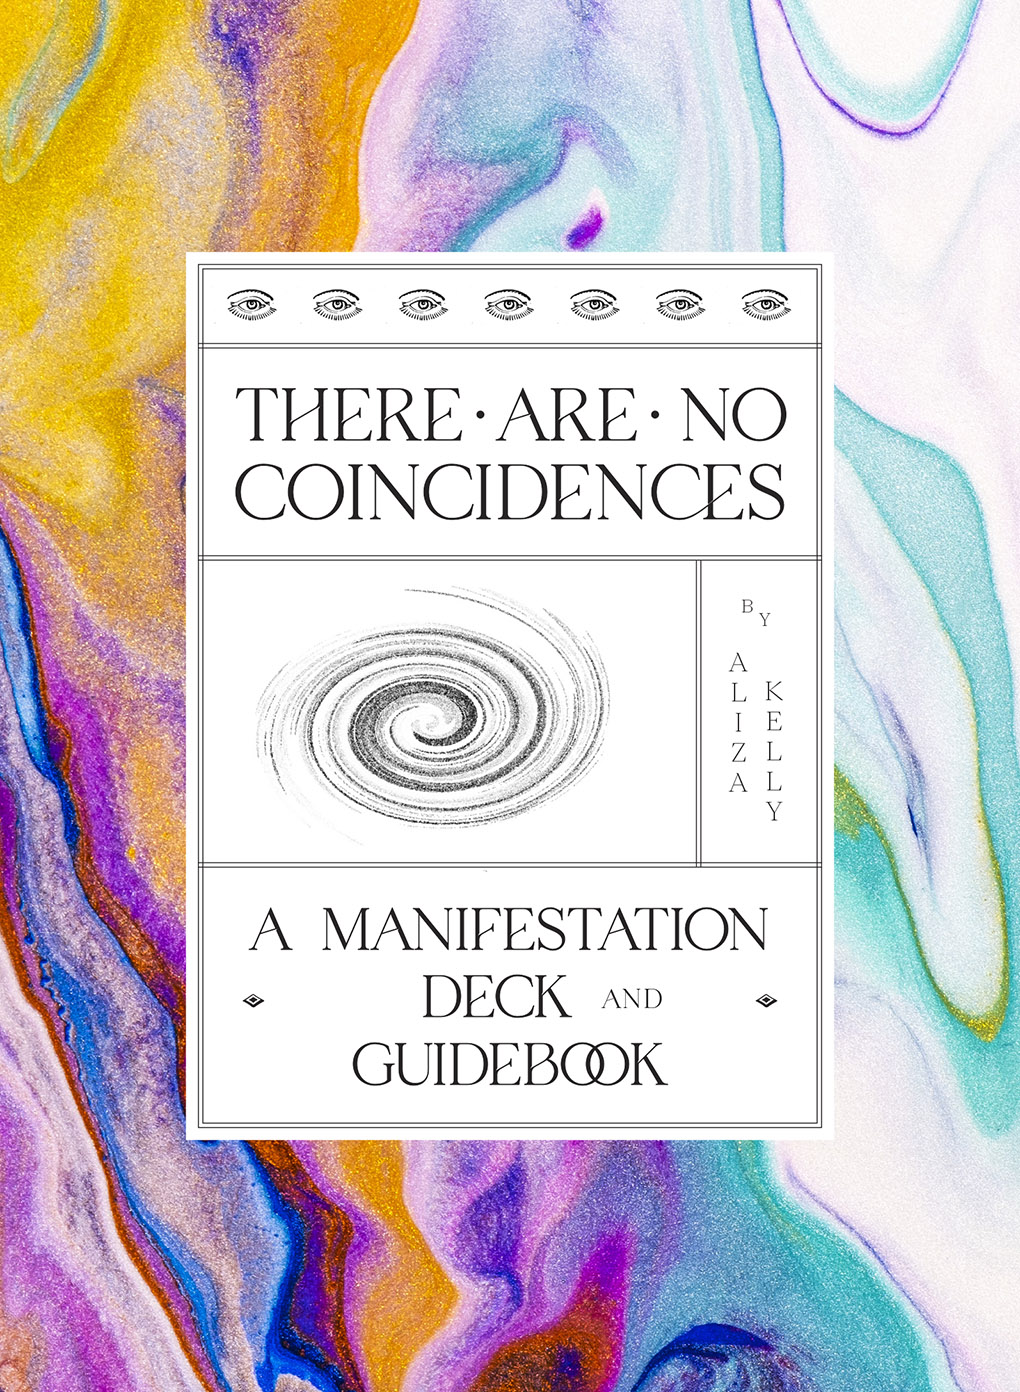 BOOK LAUNCH: There Are No Coincidences by Aliza Kelly in conversation with Ophira Edut